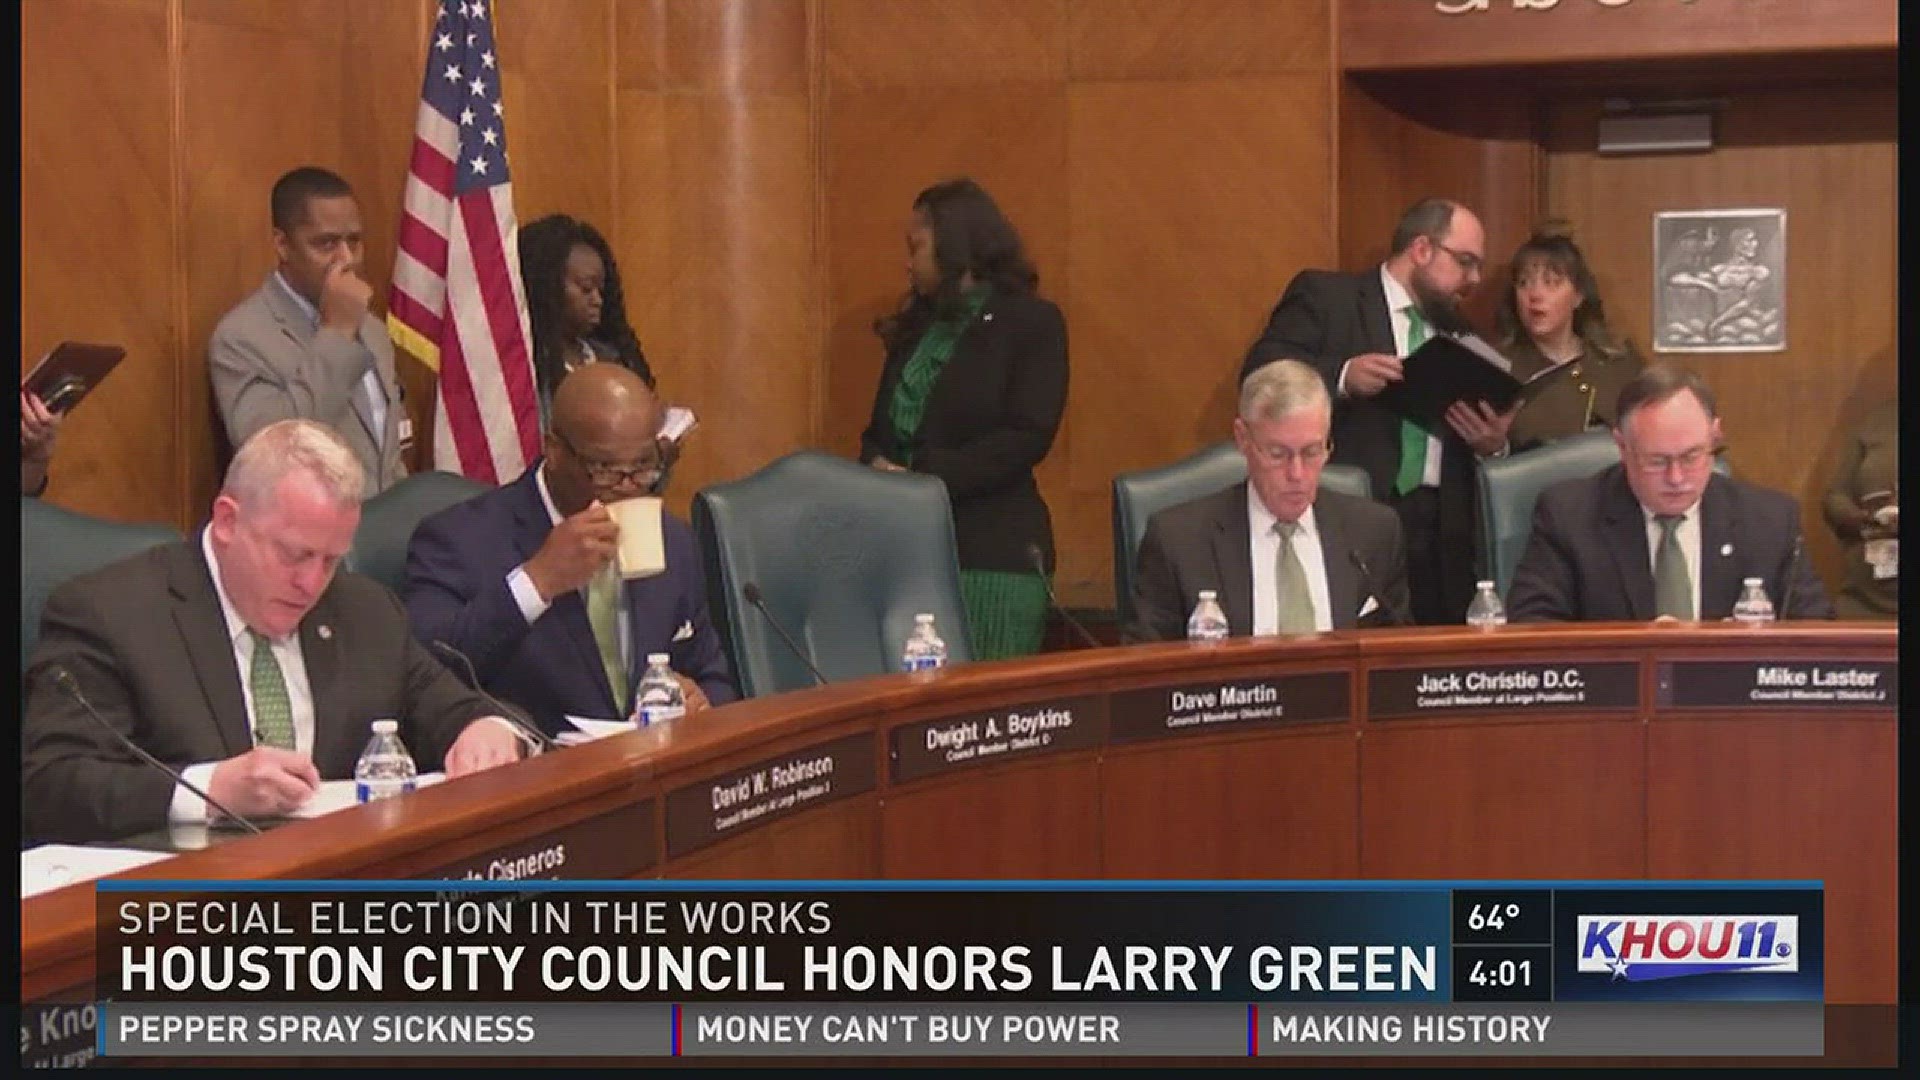 A special election will be held for councilman Larry Green, who dies Tuesday.